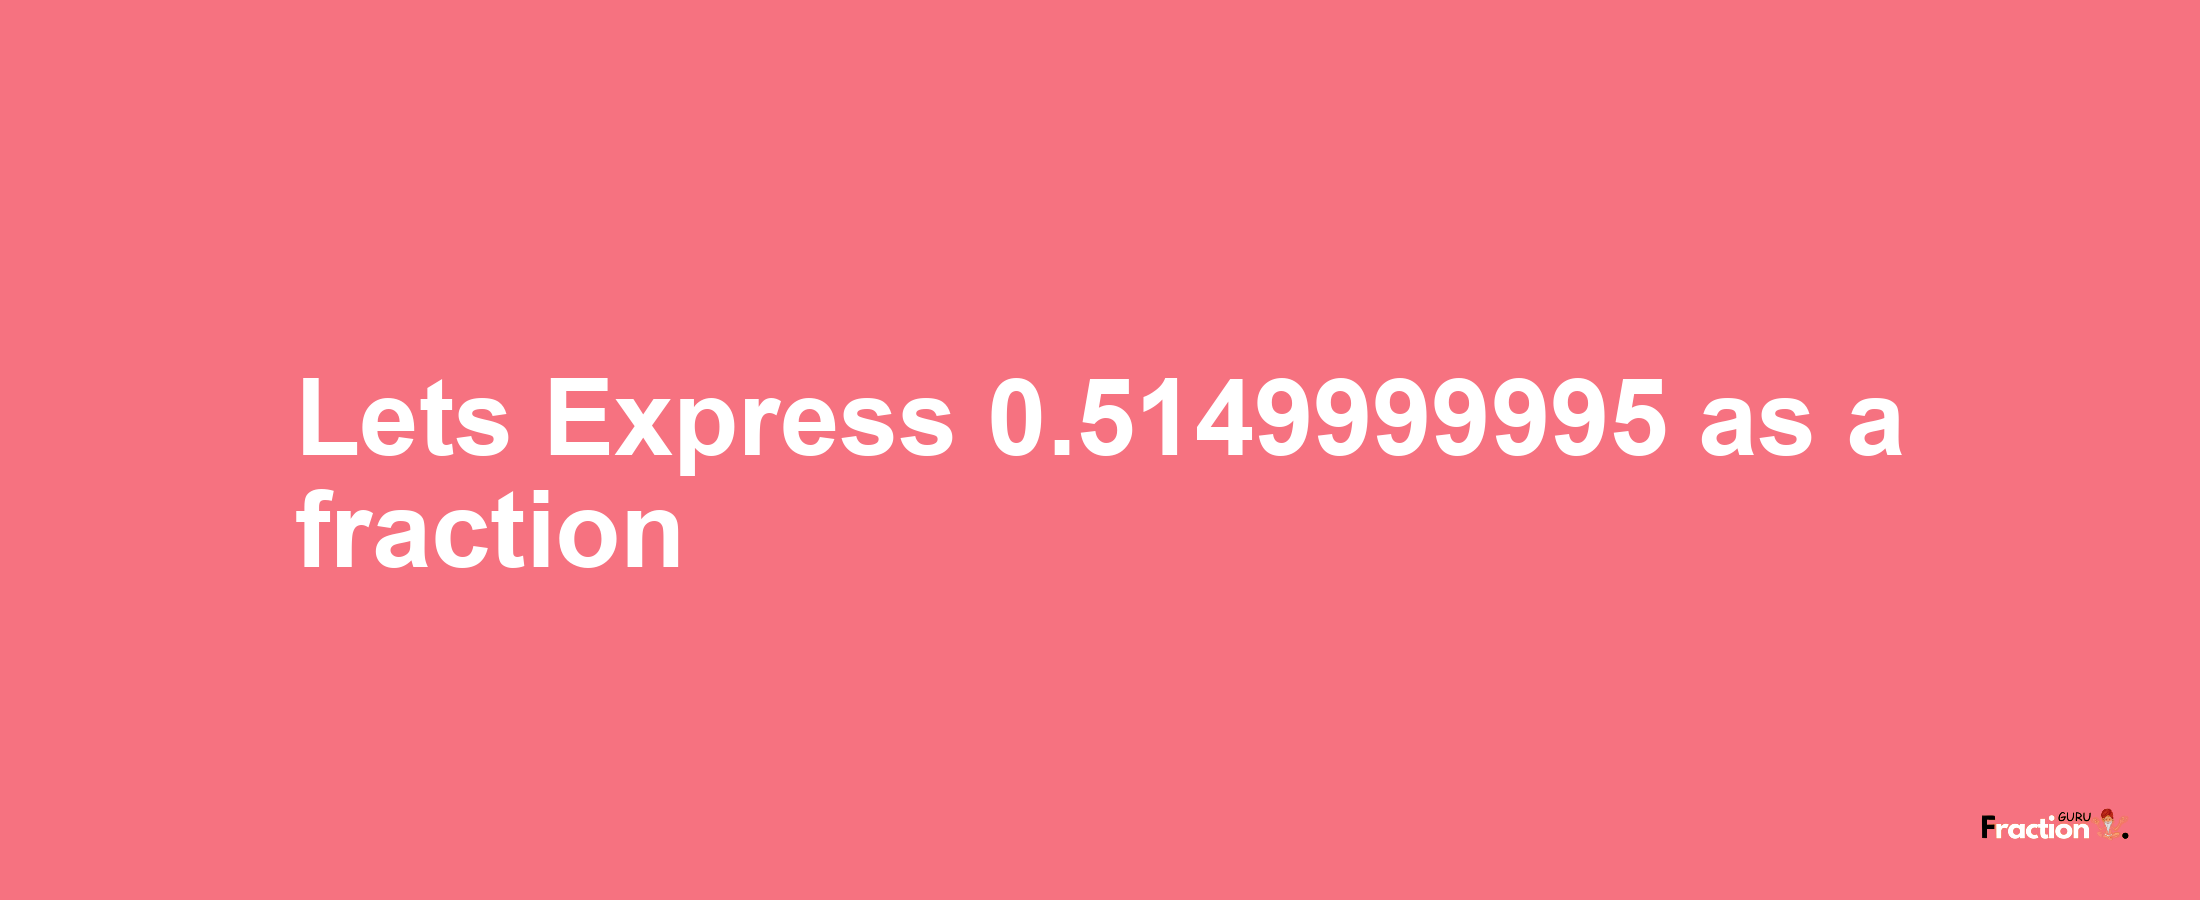 Lets Express 0.5149999995 as afraction